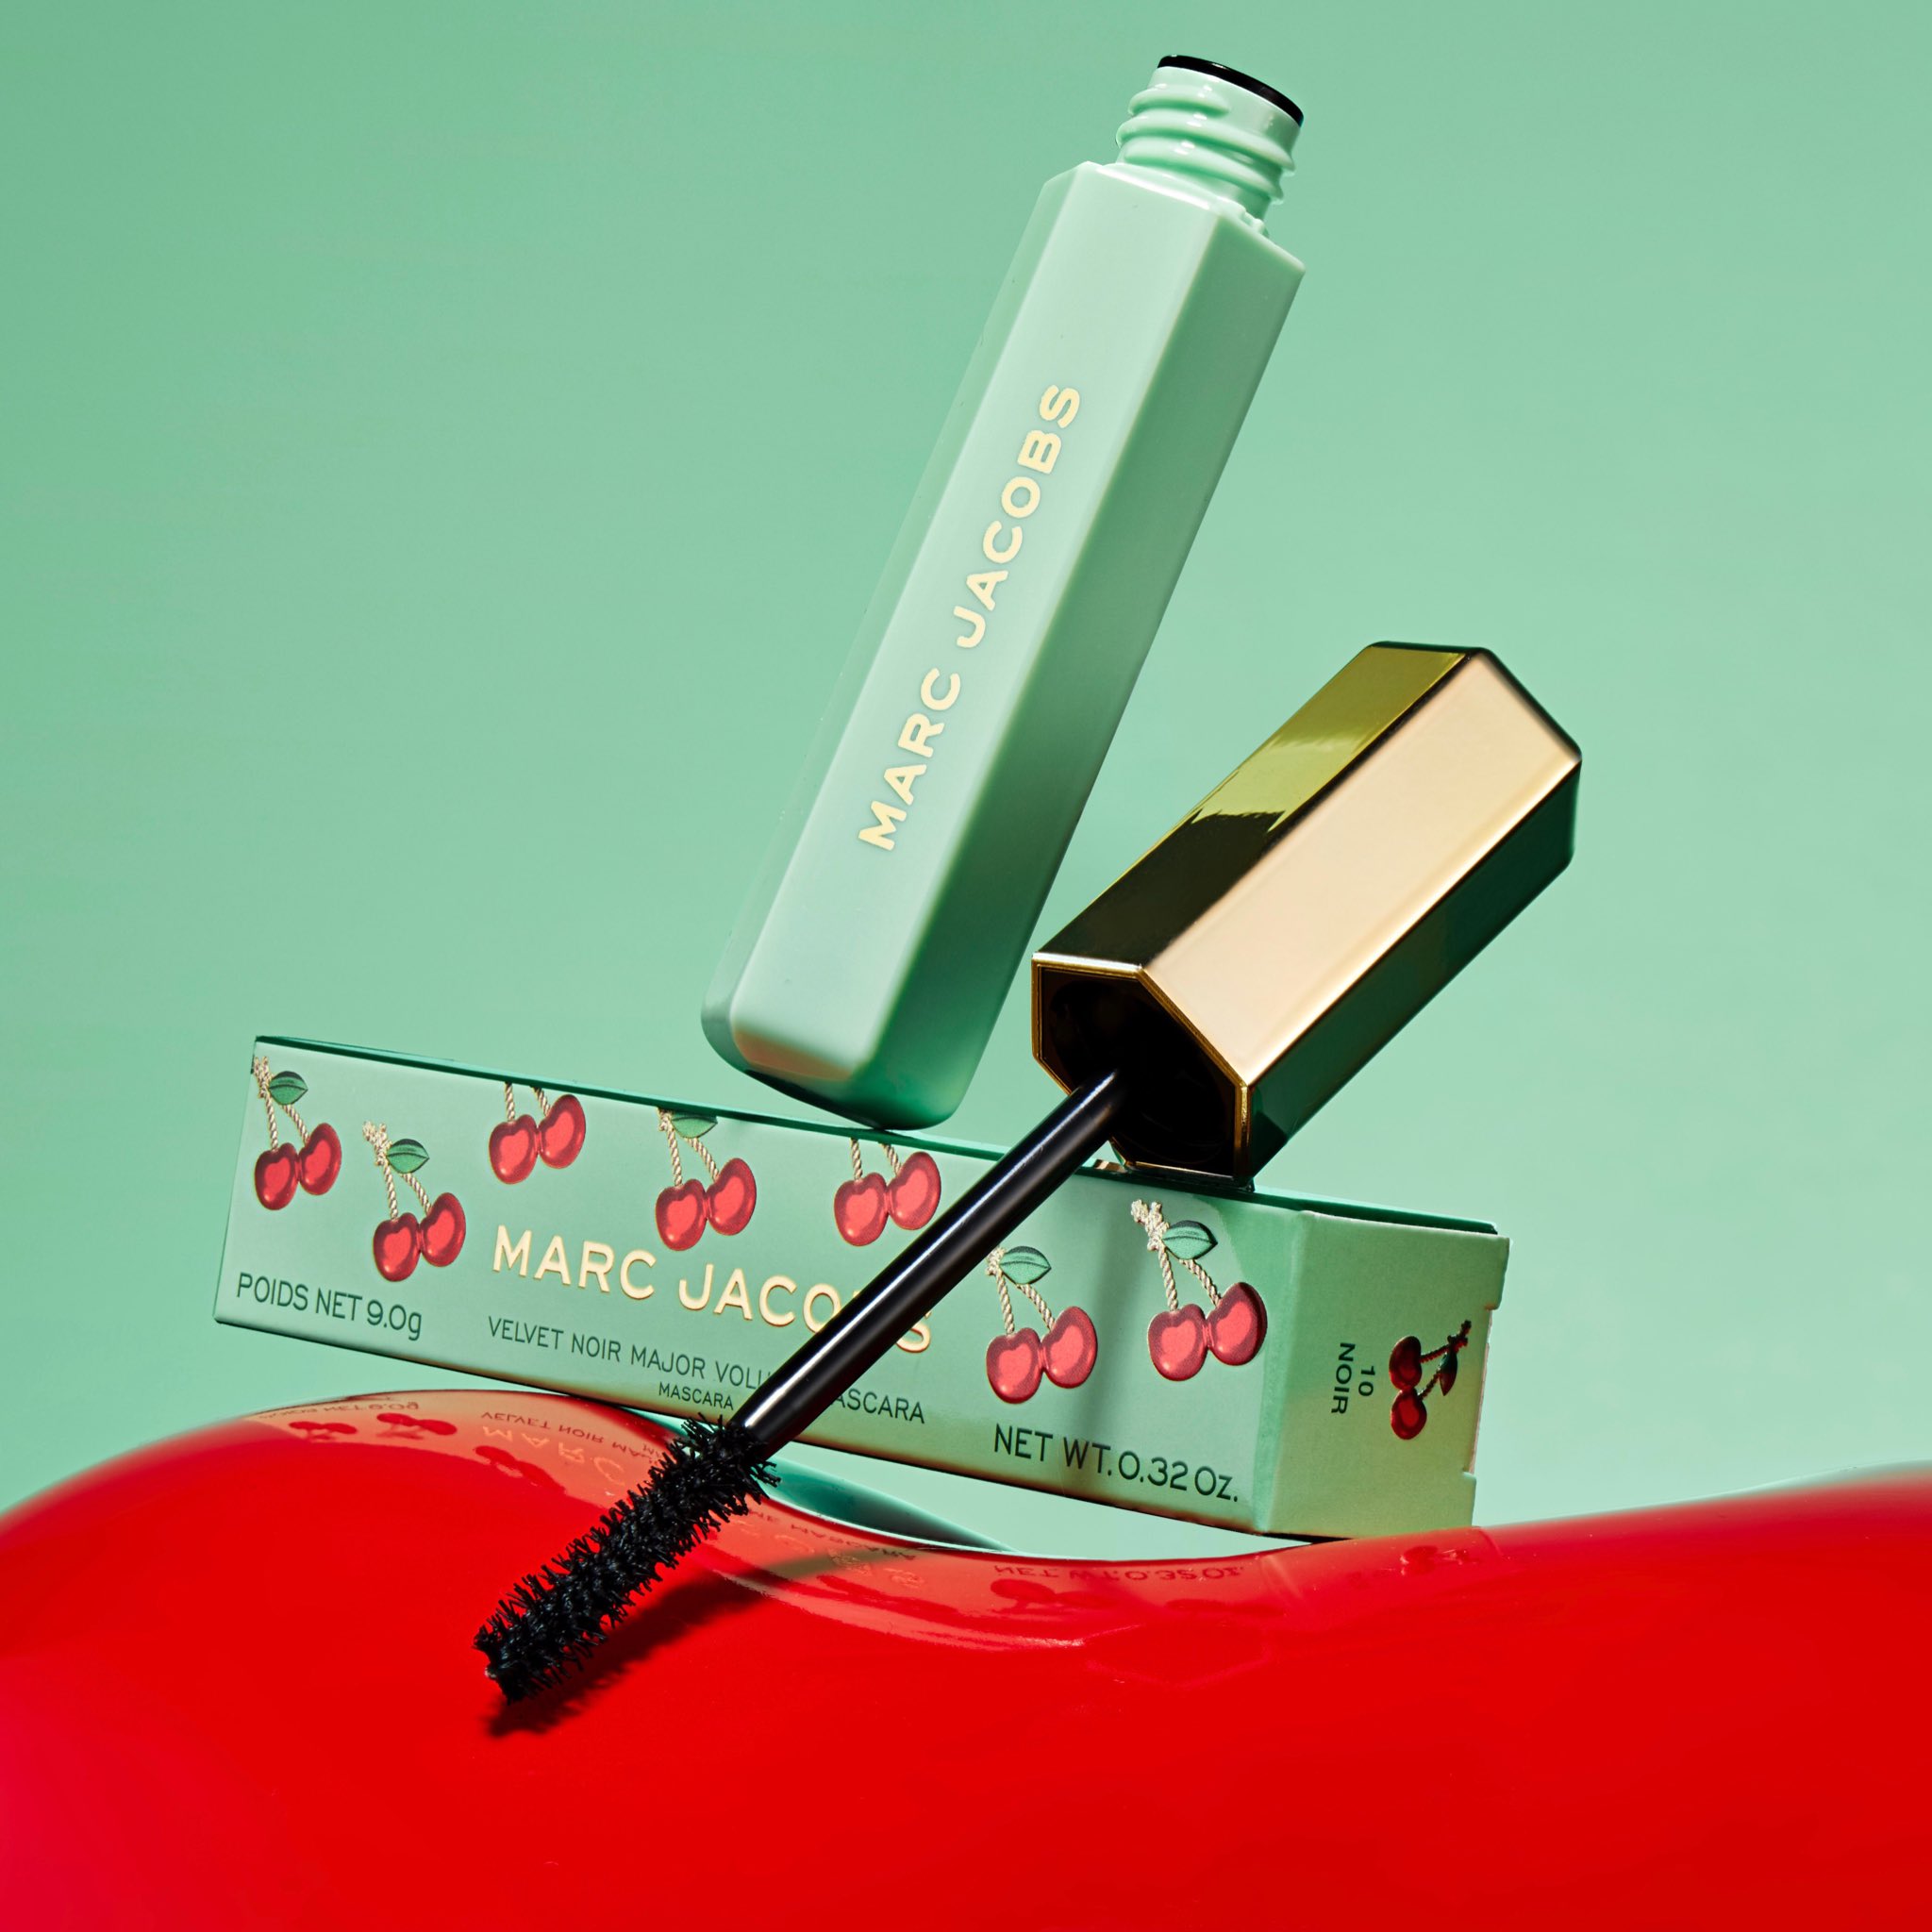 MARC JACOBS BEAUTY on Twitter: "Rediscover bestselling Velvet Noir Major Volume Mascara in new delectable, collectible cherry-covered packaging. Inside, find the same famous formula for smudge-free, instant length and volume. #VeryMerryCherry ...